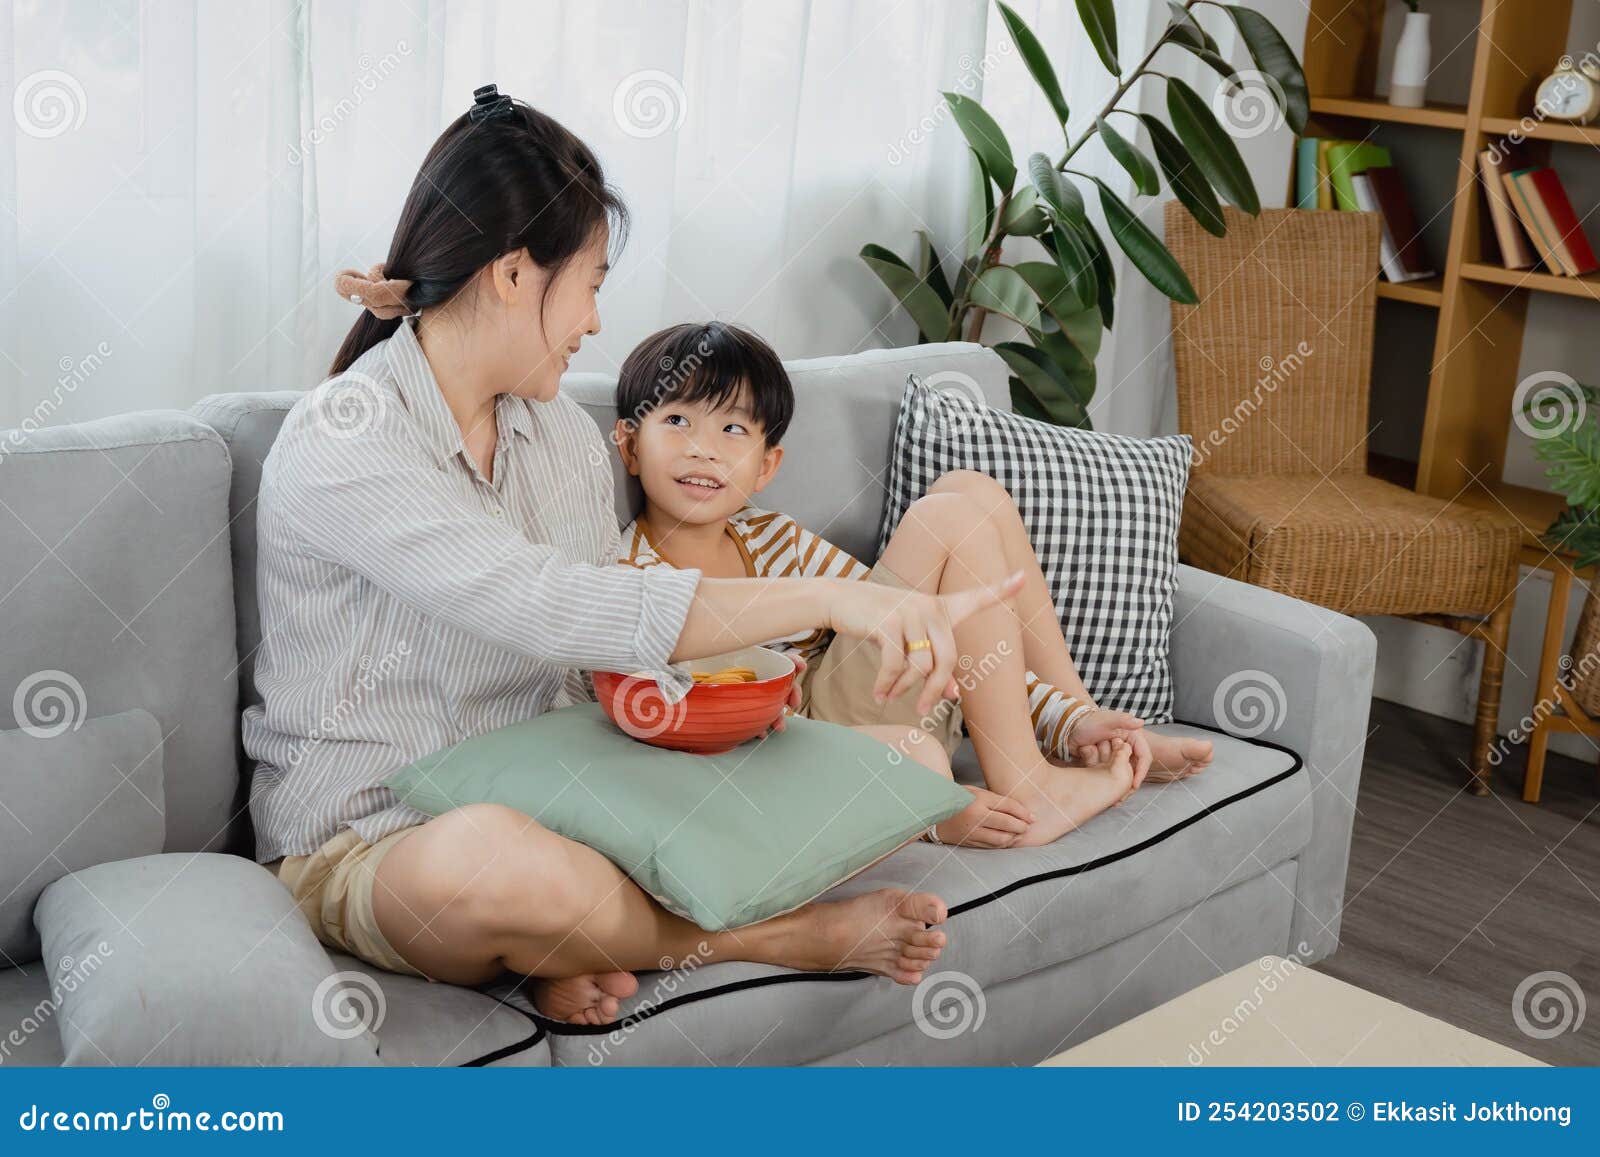 An Asian Single Mom And His Son Watch Tv On The Sofa In The Living Room